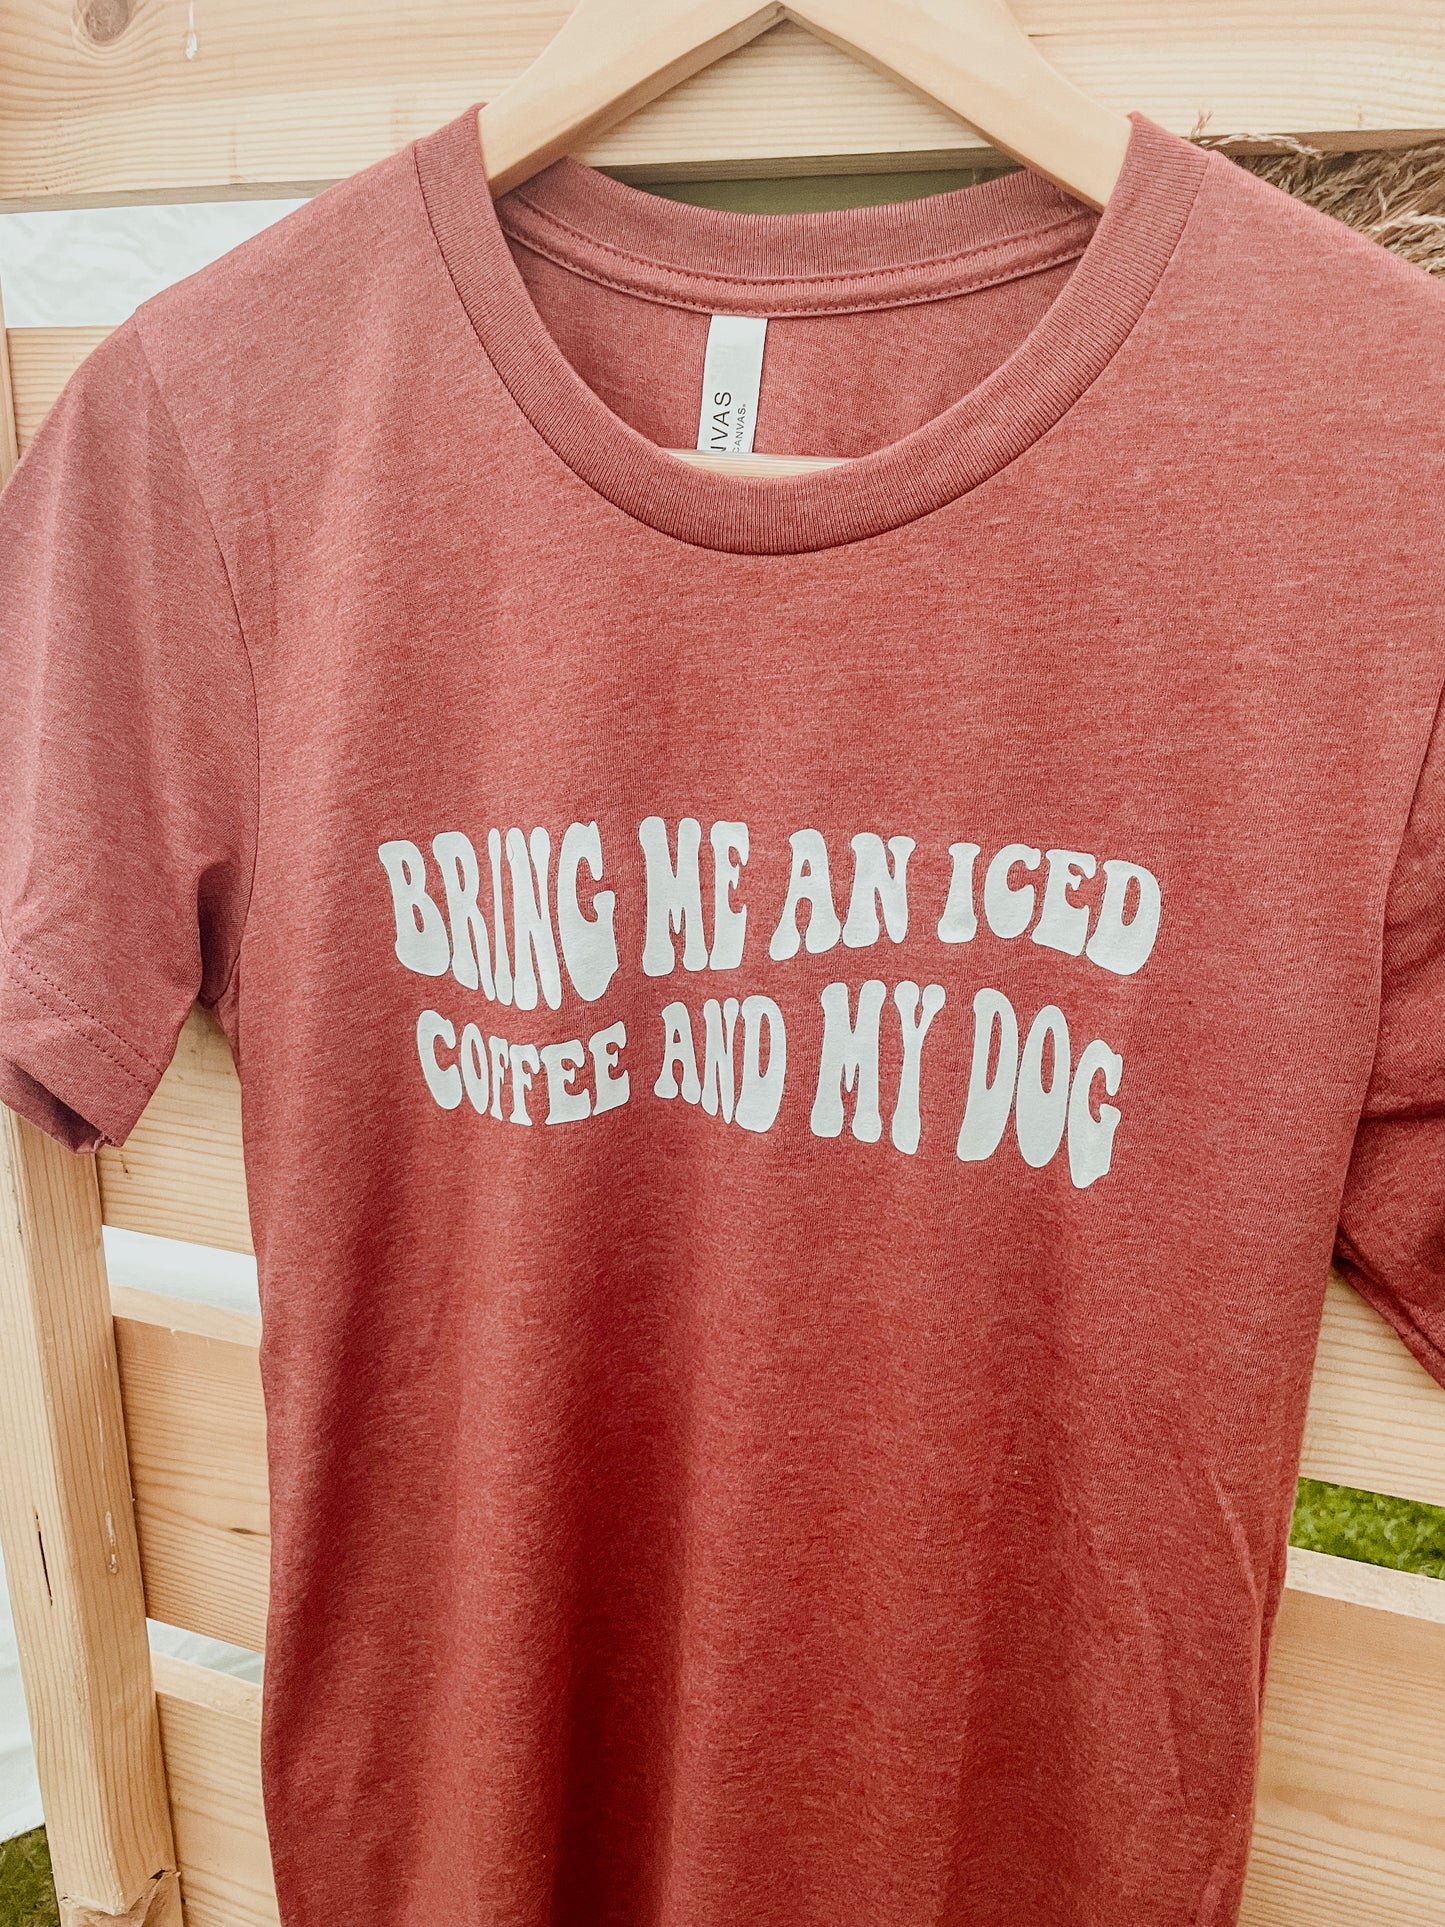 Bring Me an Iced Coffee and My Dog T-Shirt